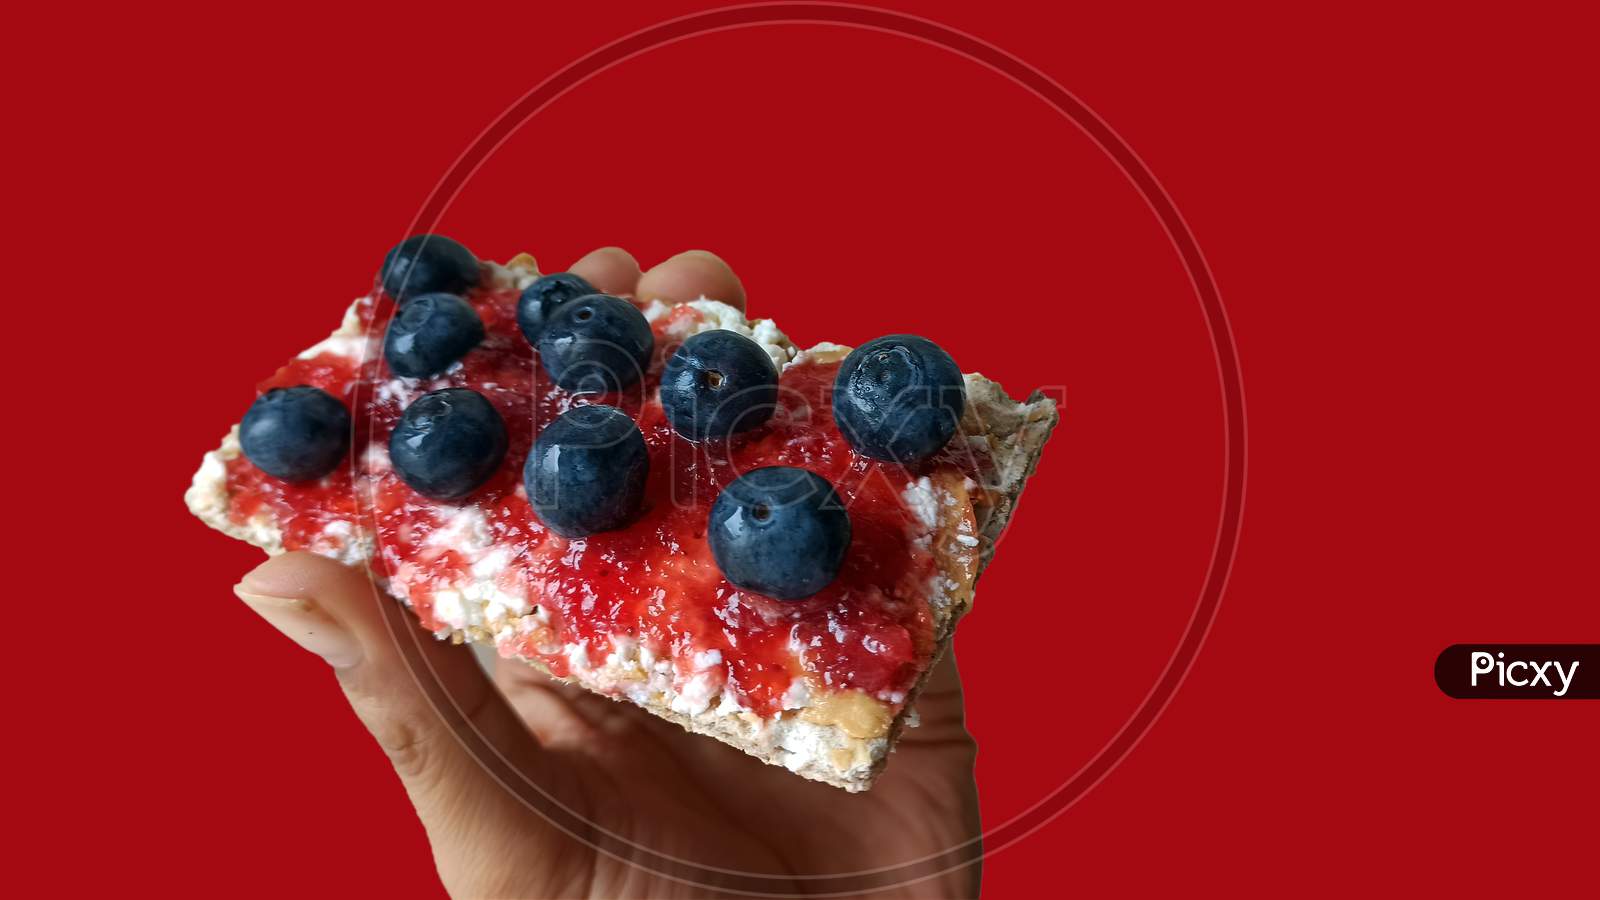 Healthy Delicious Breakfast Concept Of Fiber Crunchy Bread With Peanut Butter, Berry Jam And Bunch Of Blueberry On Top Against Bright Red Background For Copy Paste Text. Light Snacks For Fitness Diet.